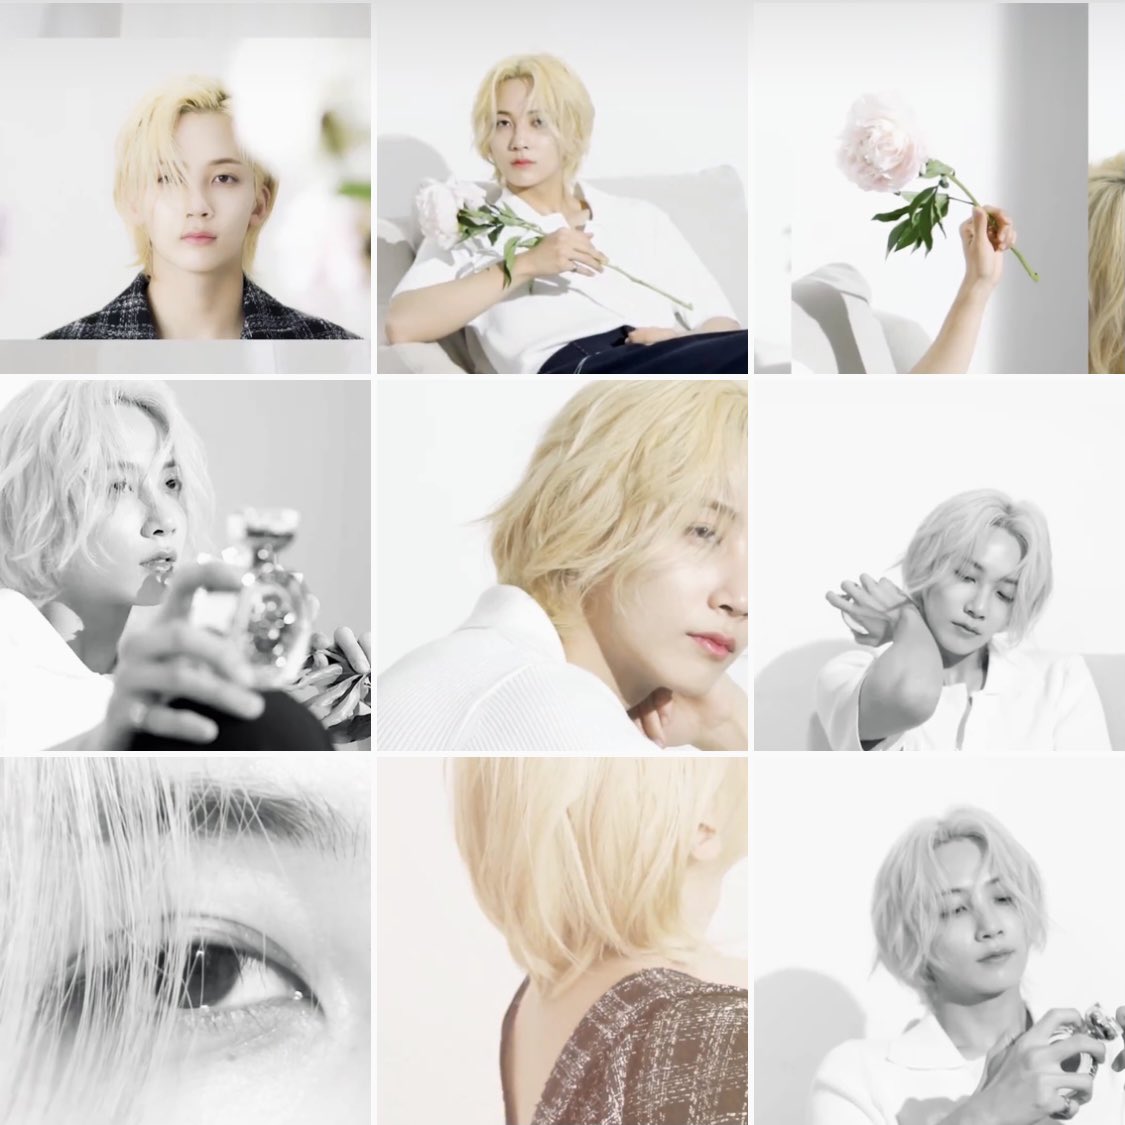 RT @choihanie: Yoon Jeonghan, the epitome of beauty @pledis_17 https://t.co/oqy6hcIPHd